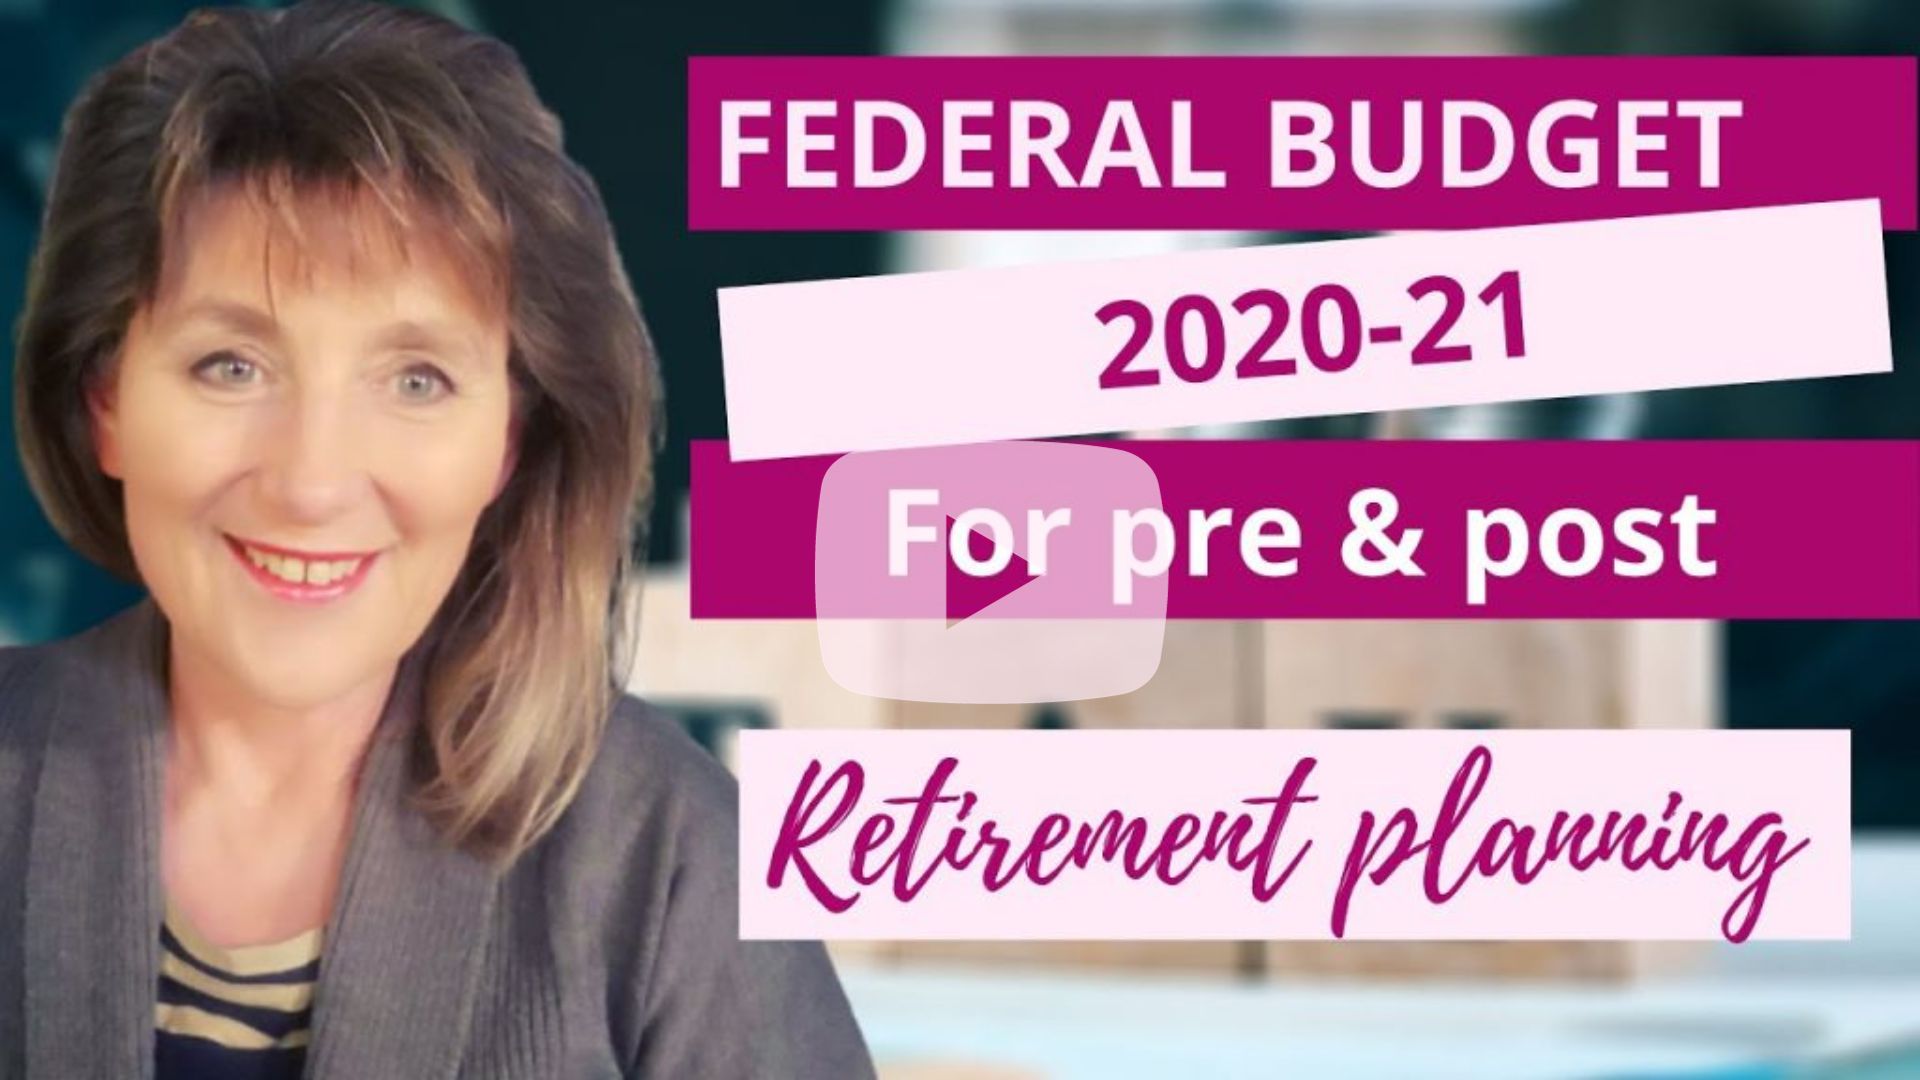 Federal Budget 2020-21 for pre and post retirement planning